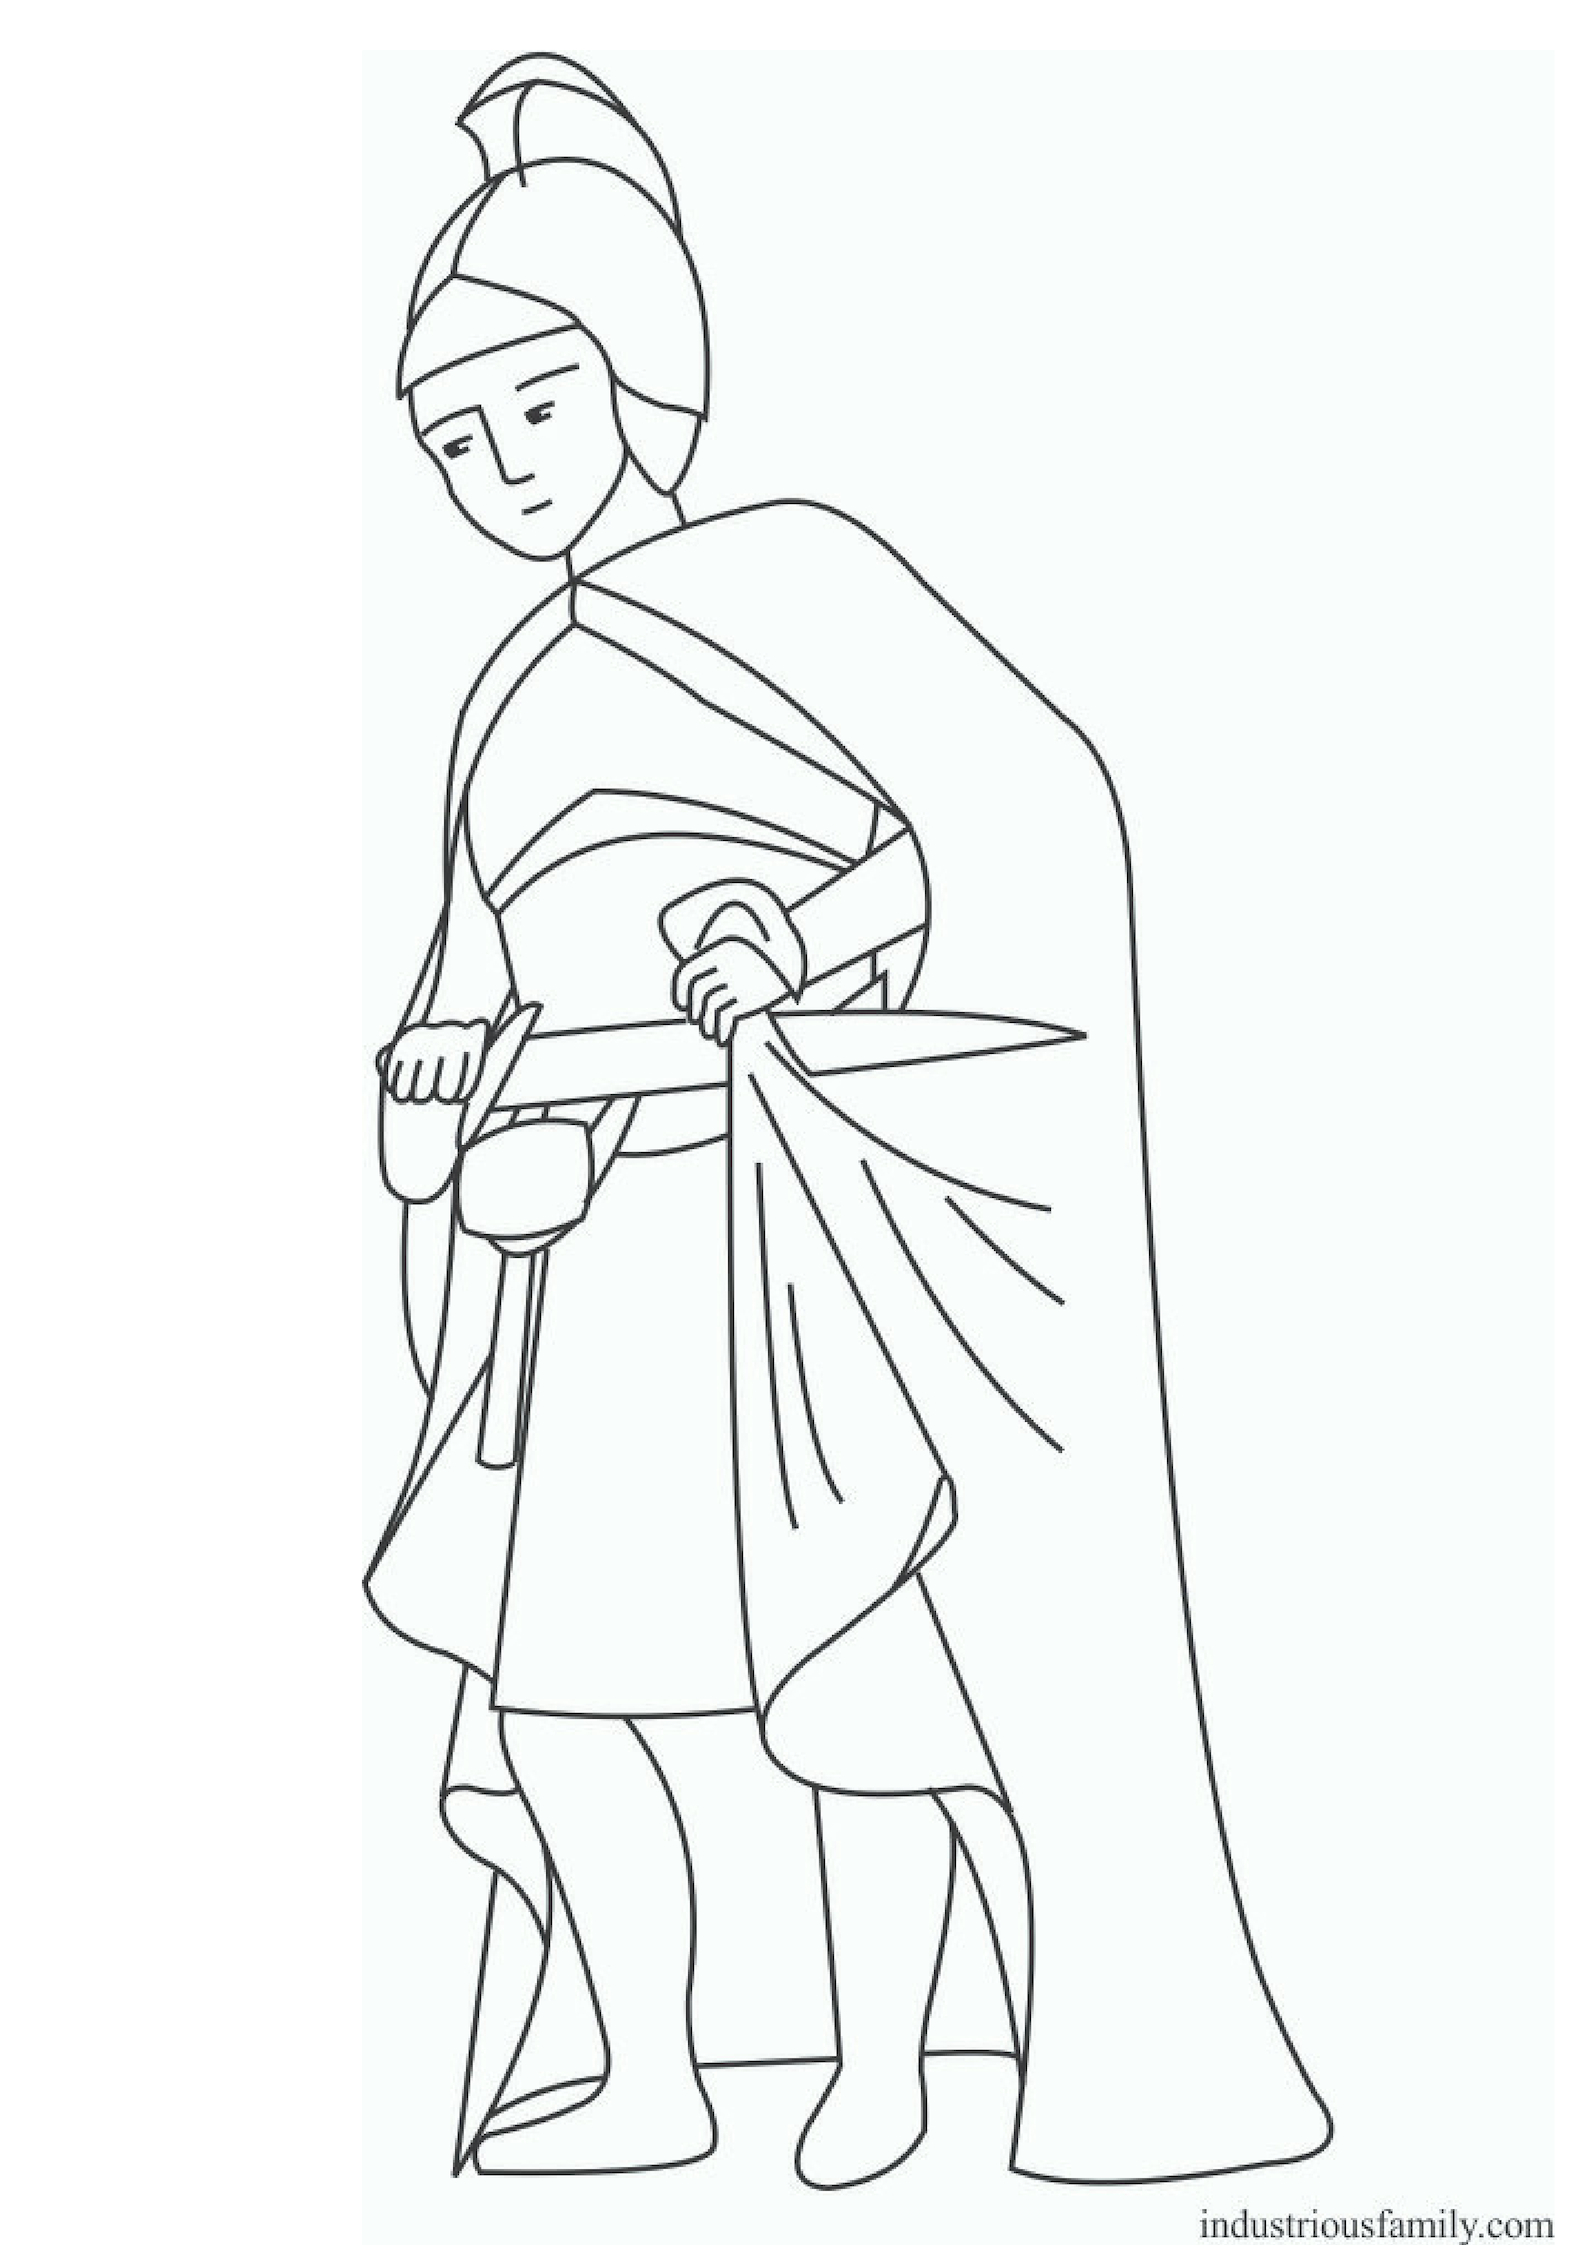 Free st martin of tours coloring page